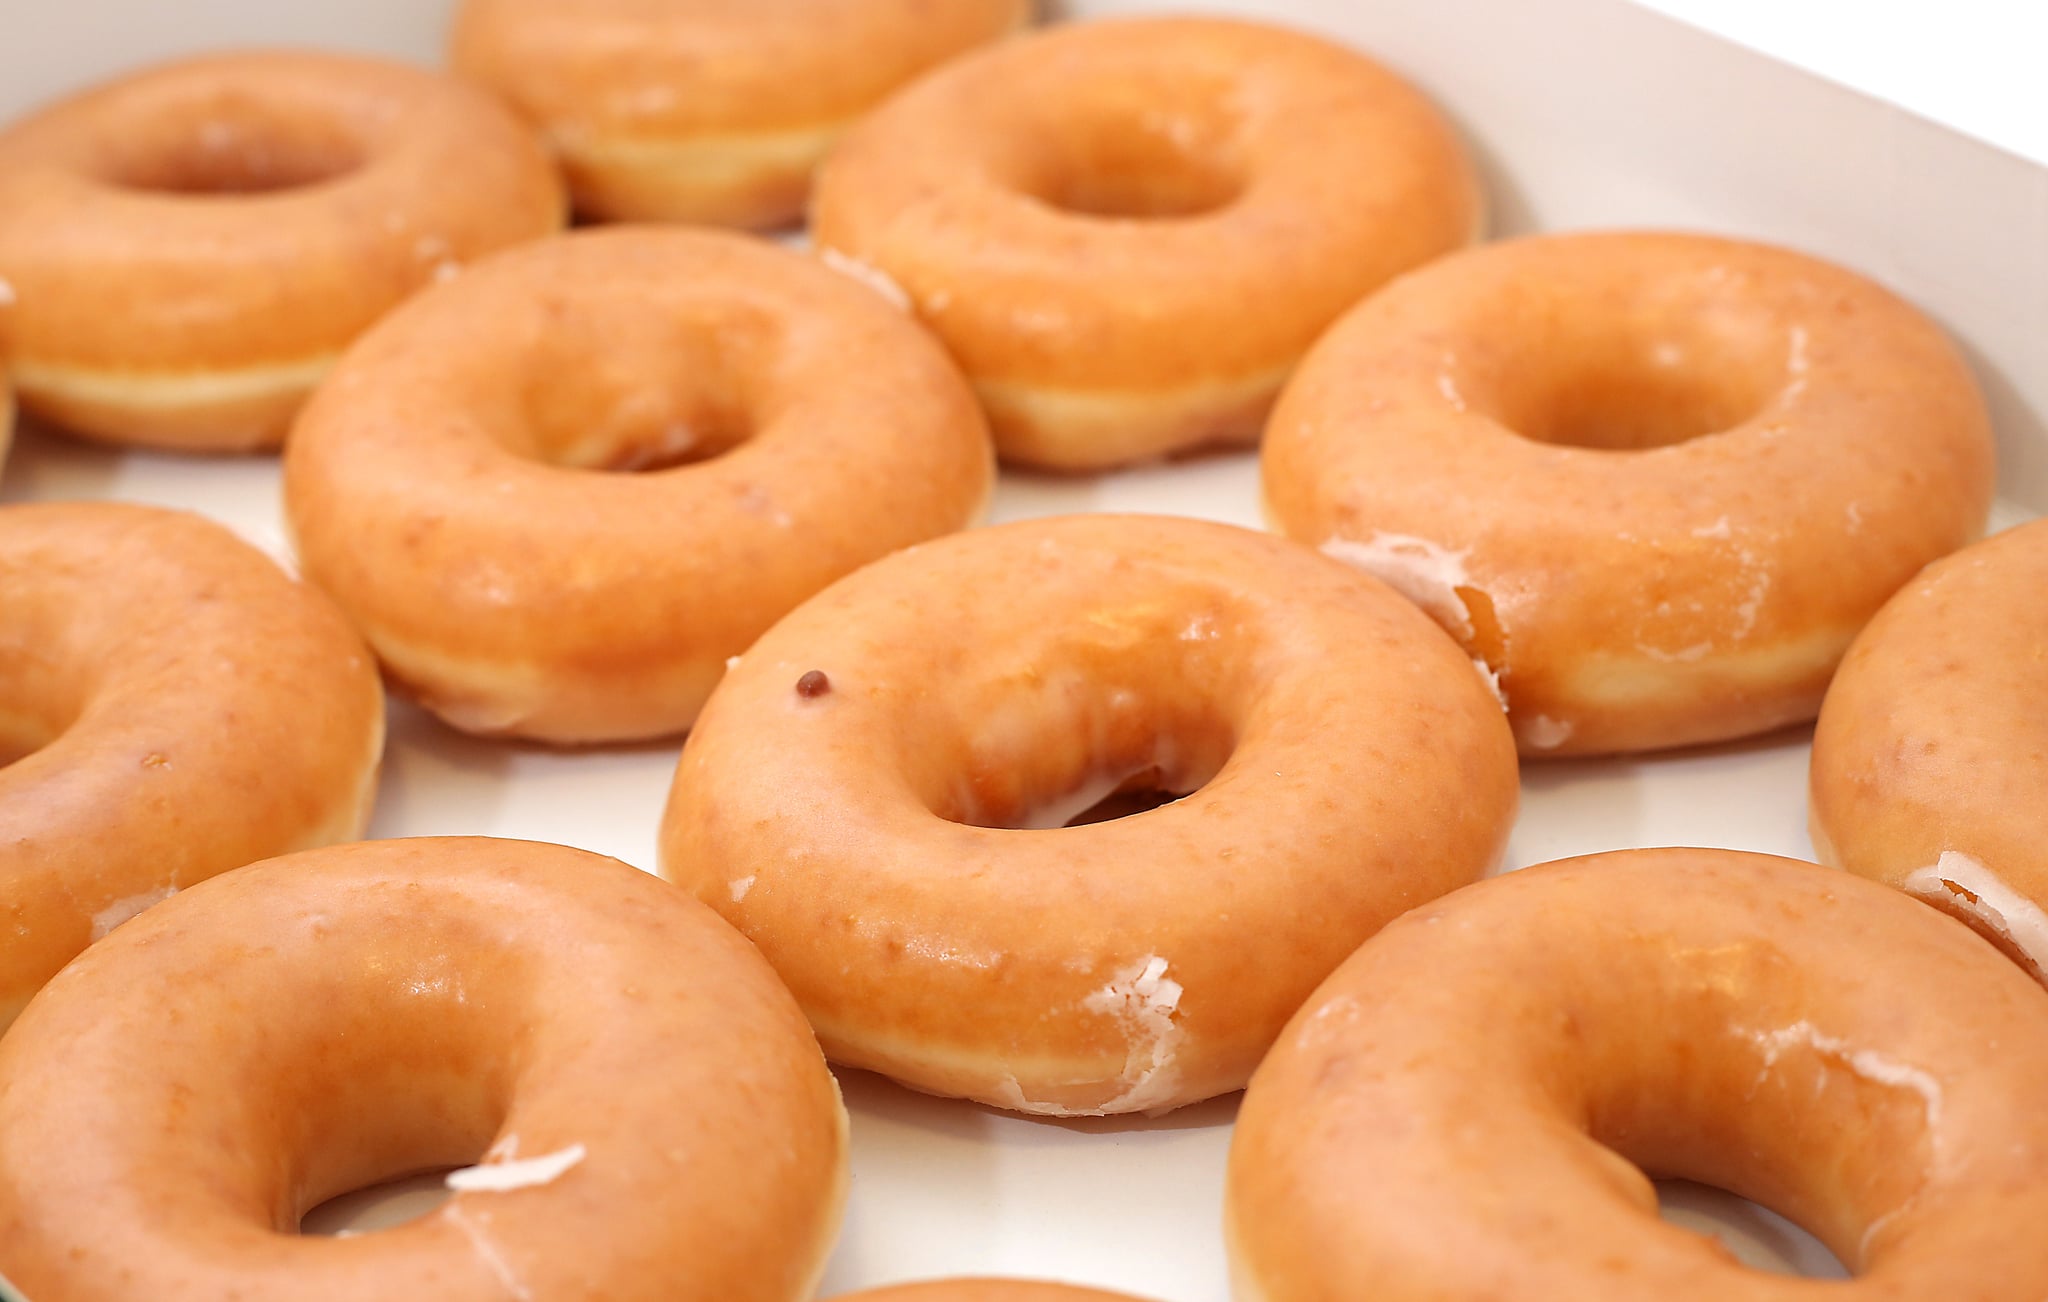 Krispy Kreme doughnuts.   (Photo by Philip Toscano/PA Images via Getty Images)